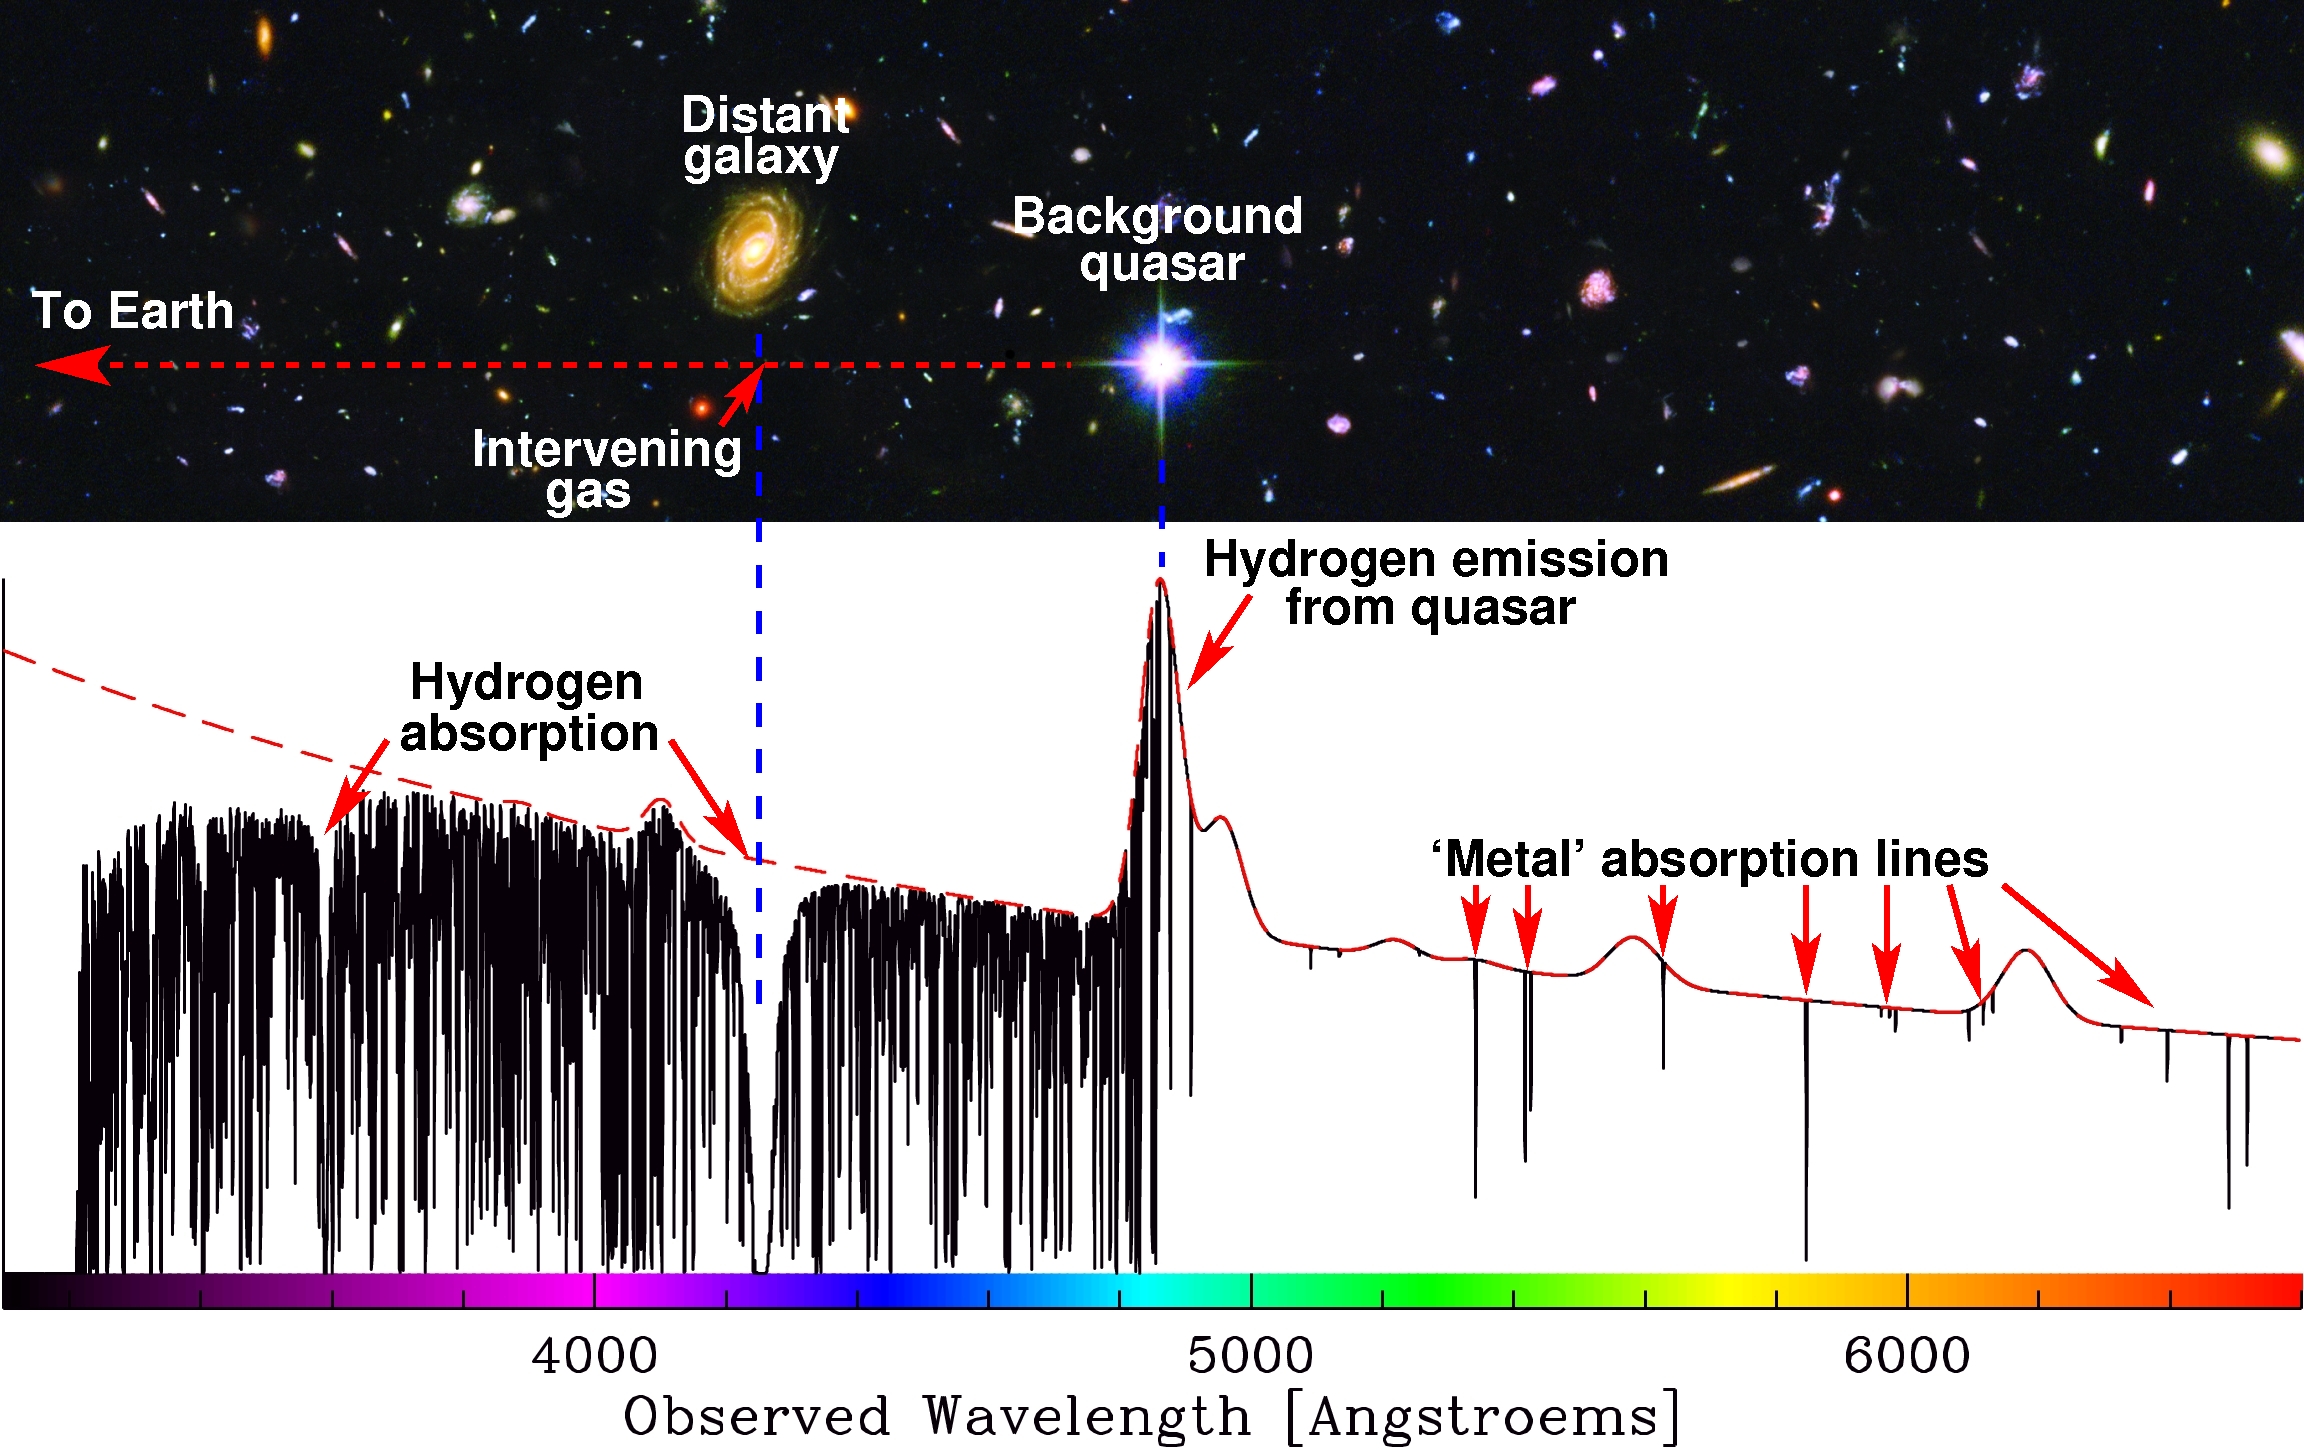 QSO absorption lines are due to intervening gas